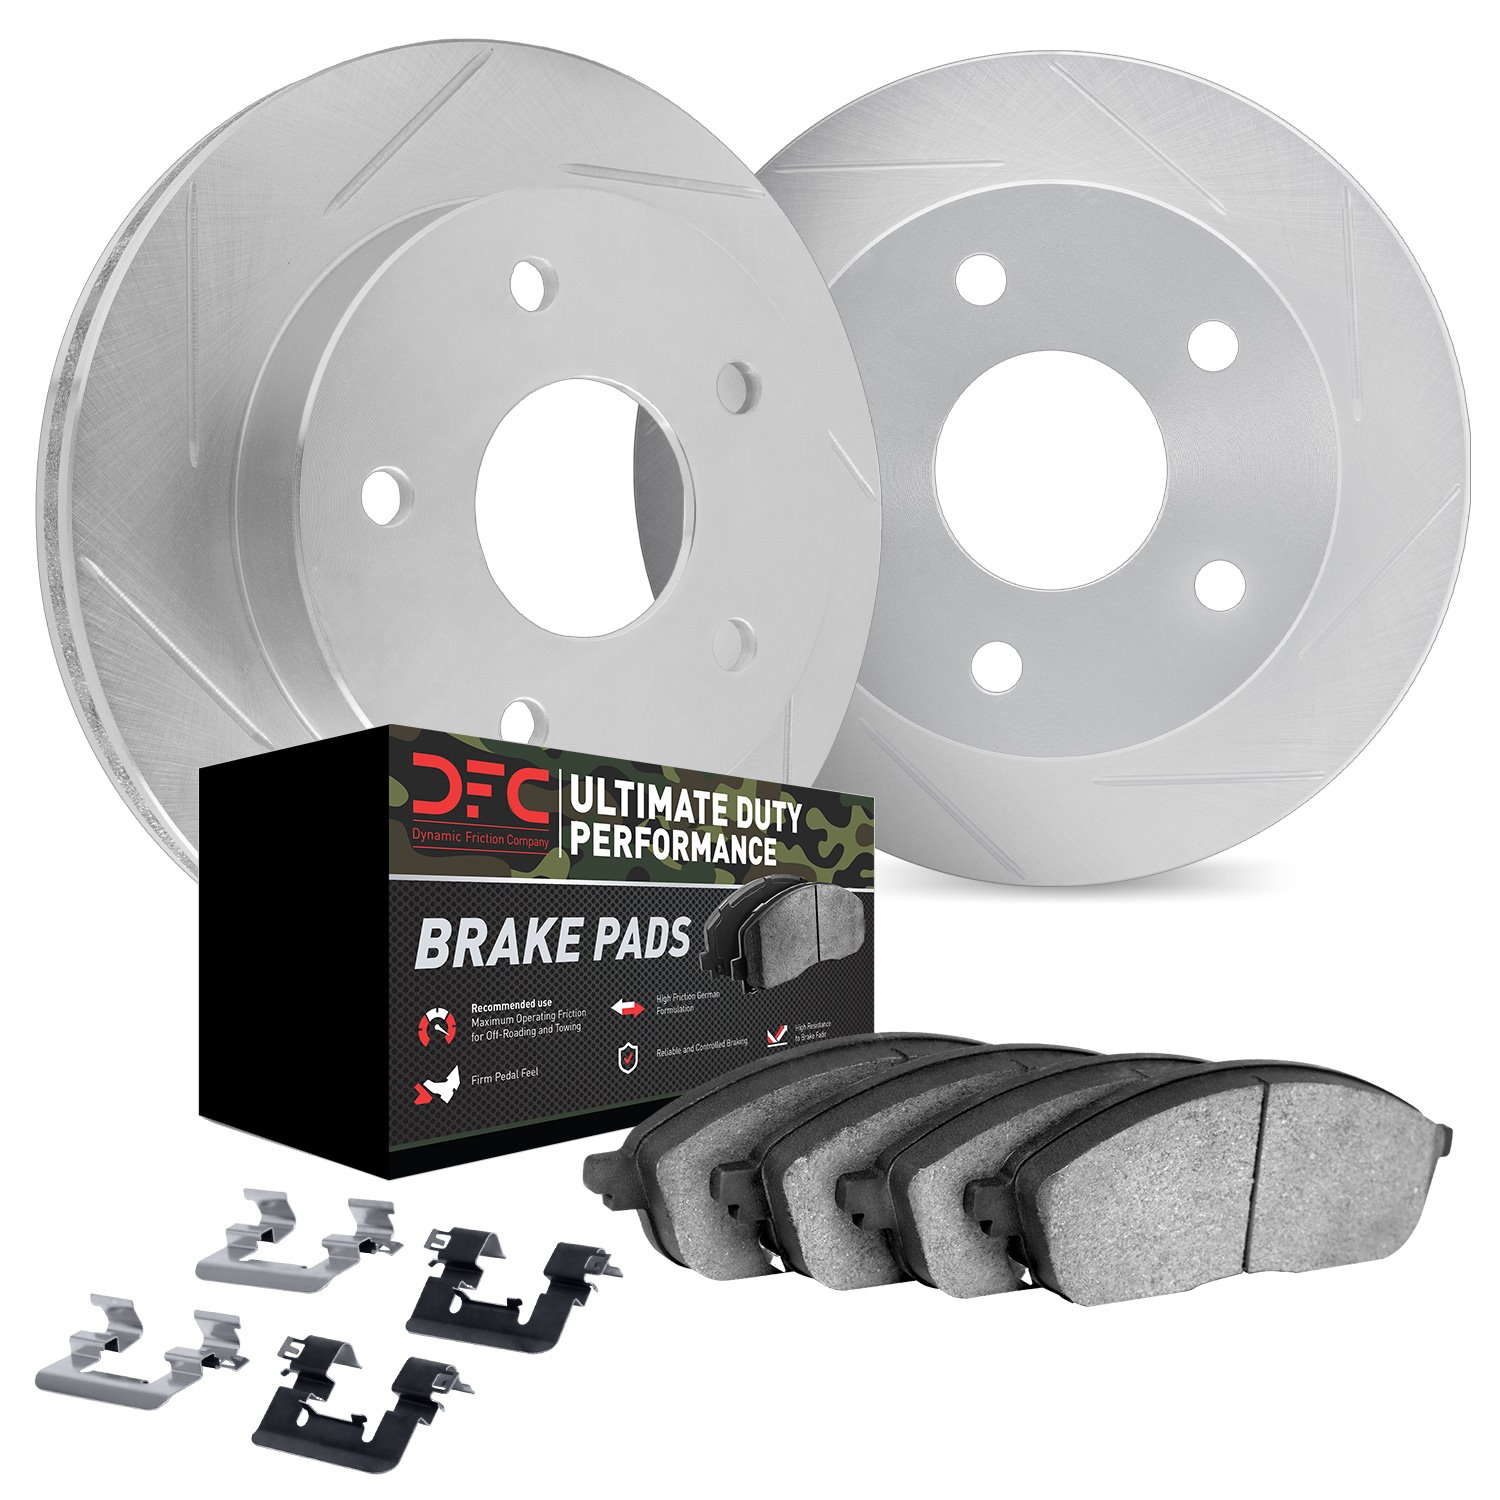 5412-40022 Slotted Brake Rotors with Ultimate-Duty Brake Pads Kit & Hardware [Silver], Fits Select Multiple Makes/Models, Positi